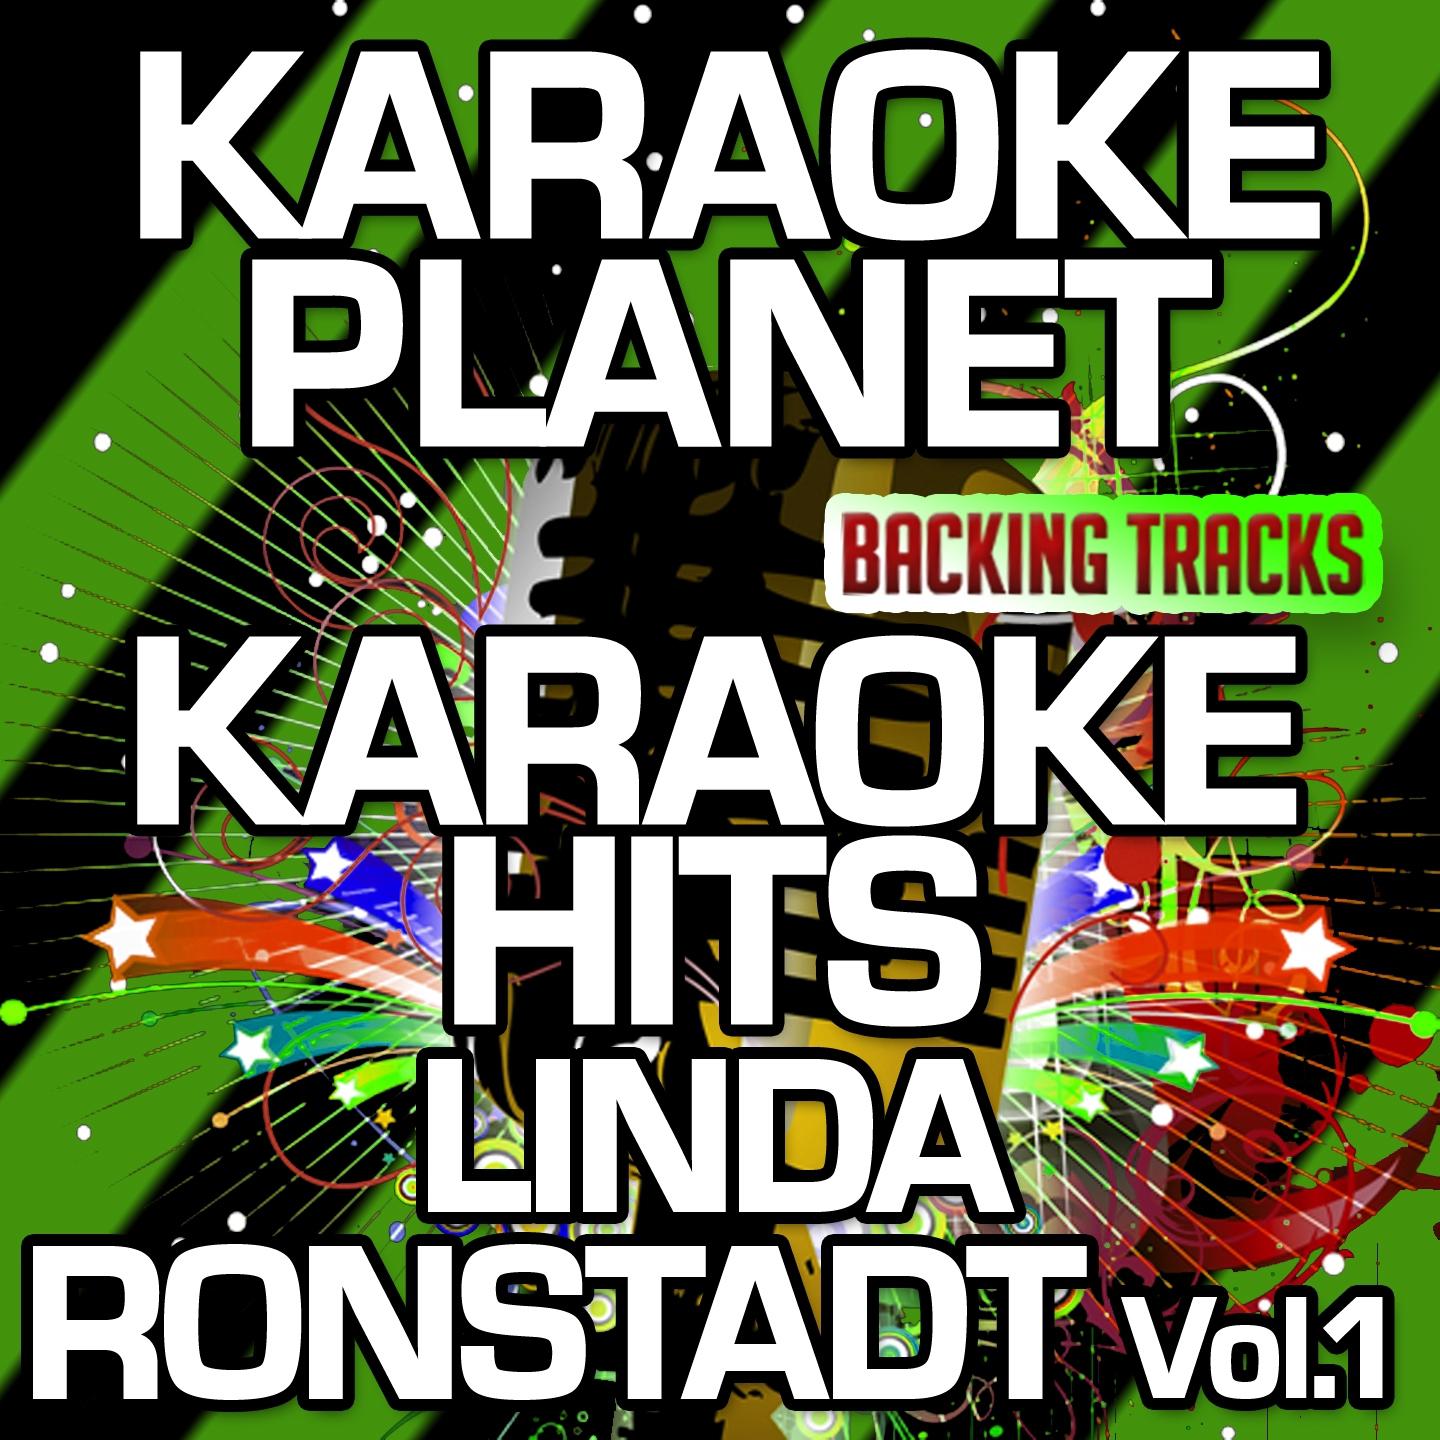 It's So Easy (Karaoke Version With Background Vocals) (Originally Performed By Linda Ronstadt)